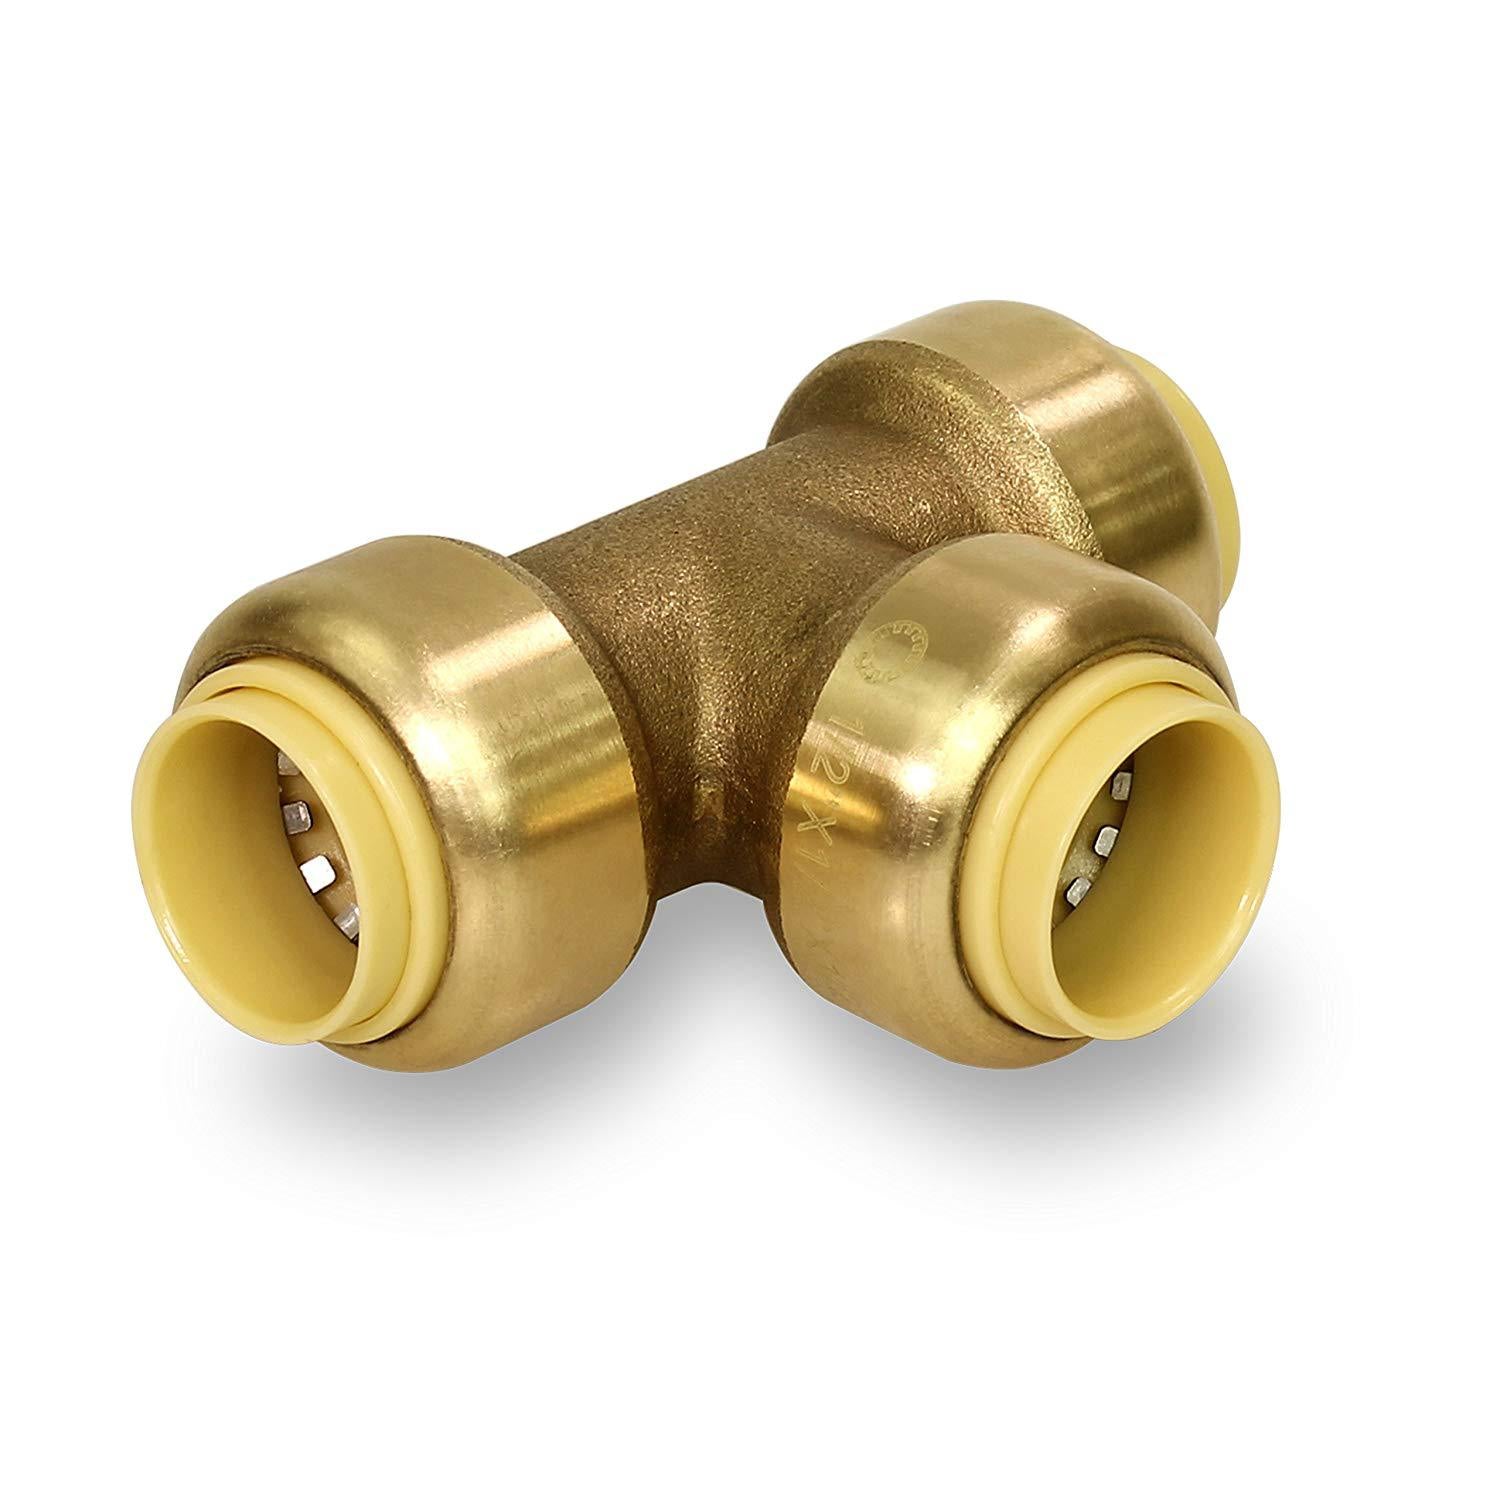 1/2-Inch Push Plumbing Tee,Push-to-Connect Pex Fittings